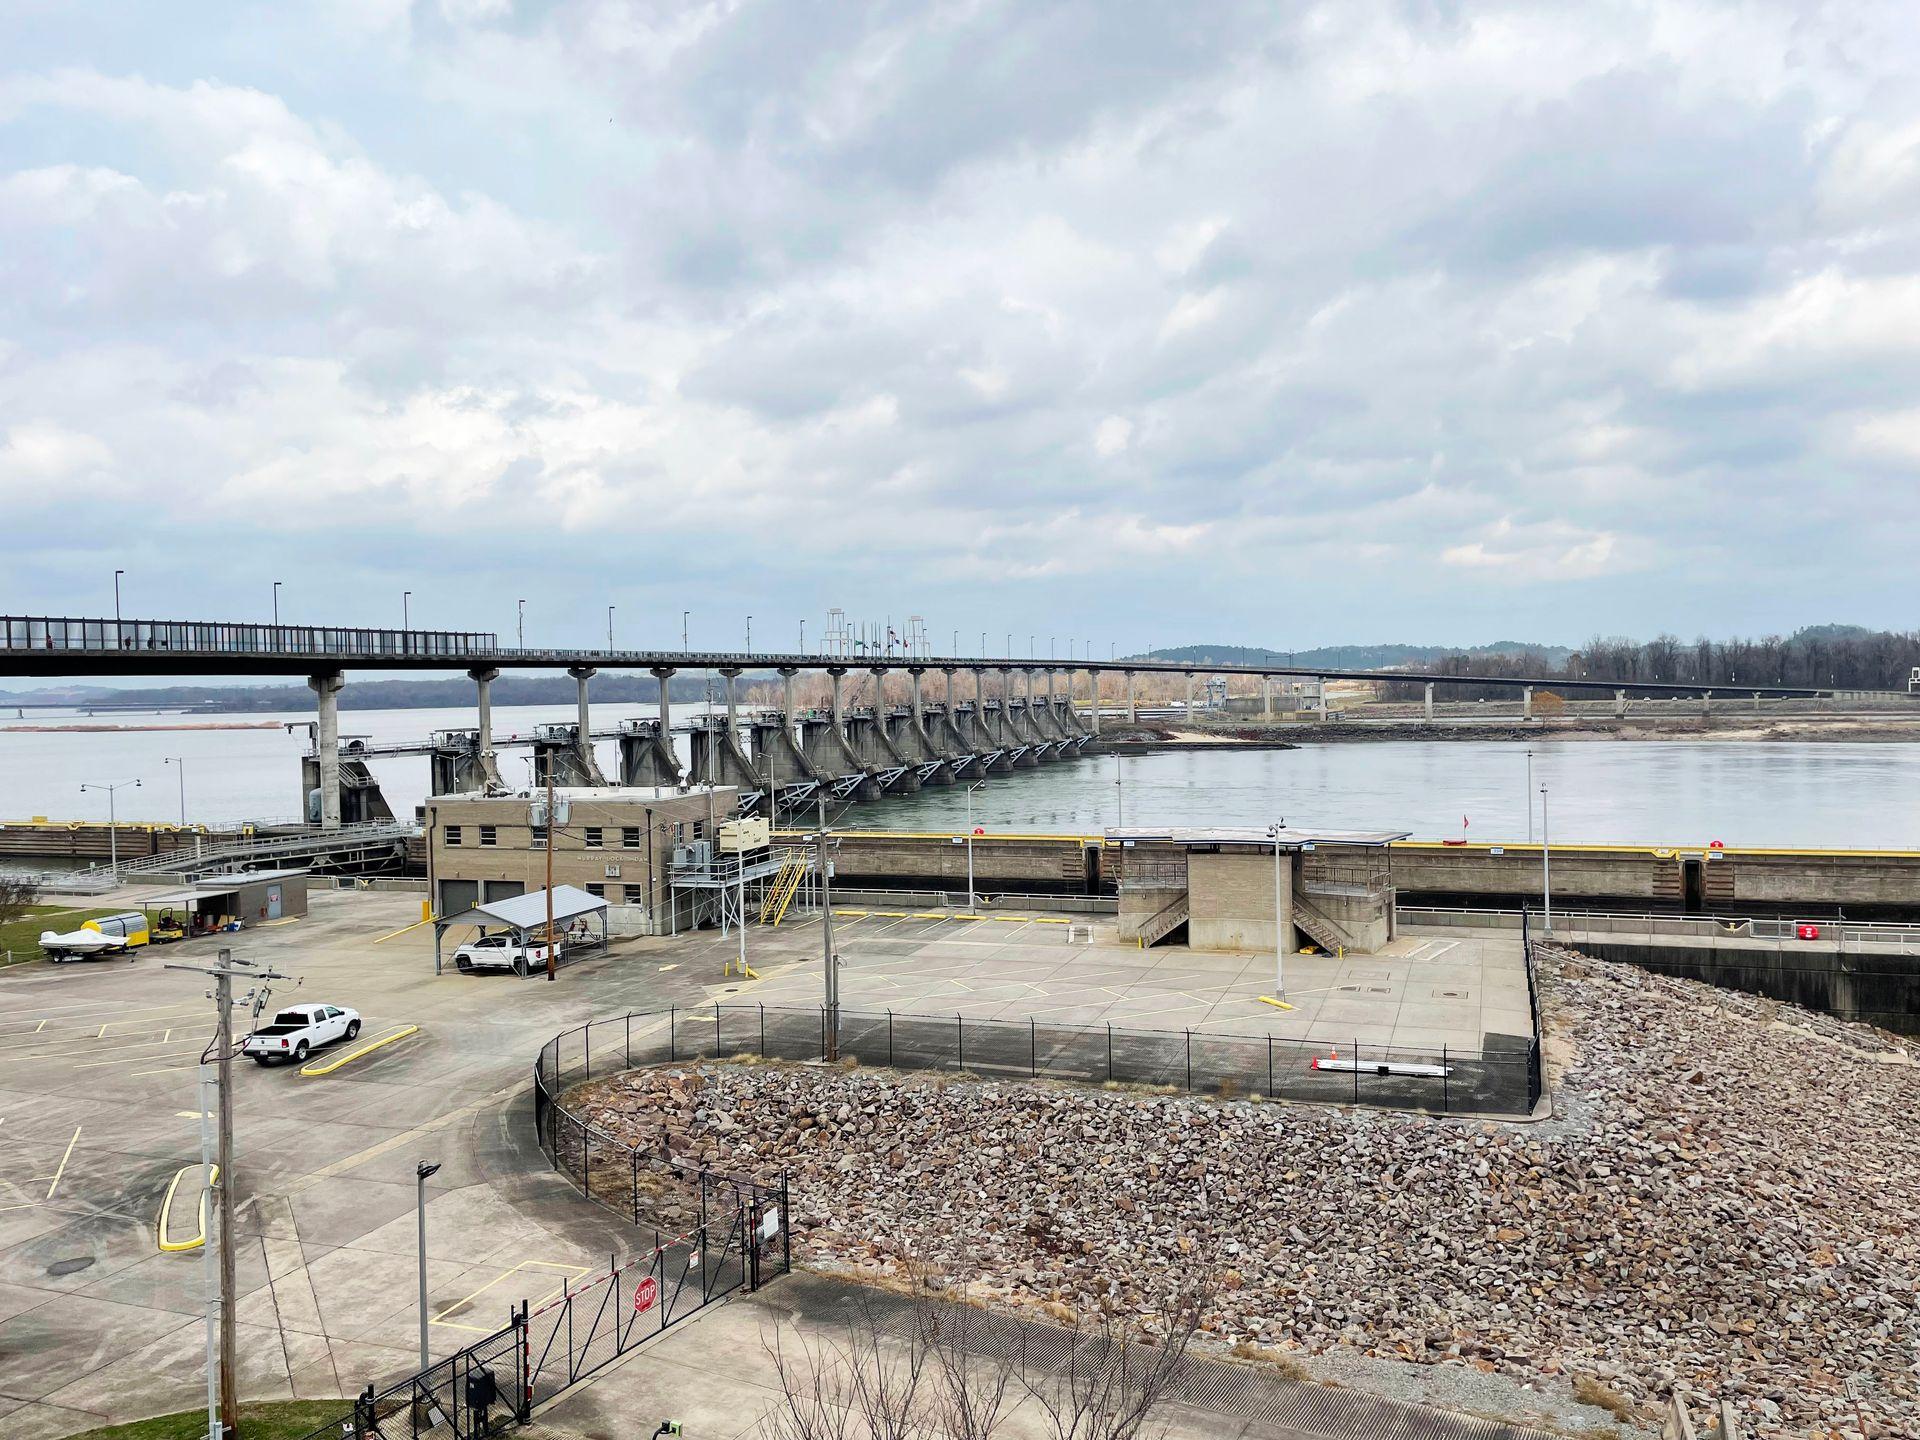 A view of the Big Dam Bridge from the shore. The interworkings of the dam are below and pedestrians can walk on top.